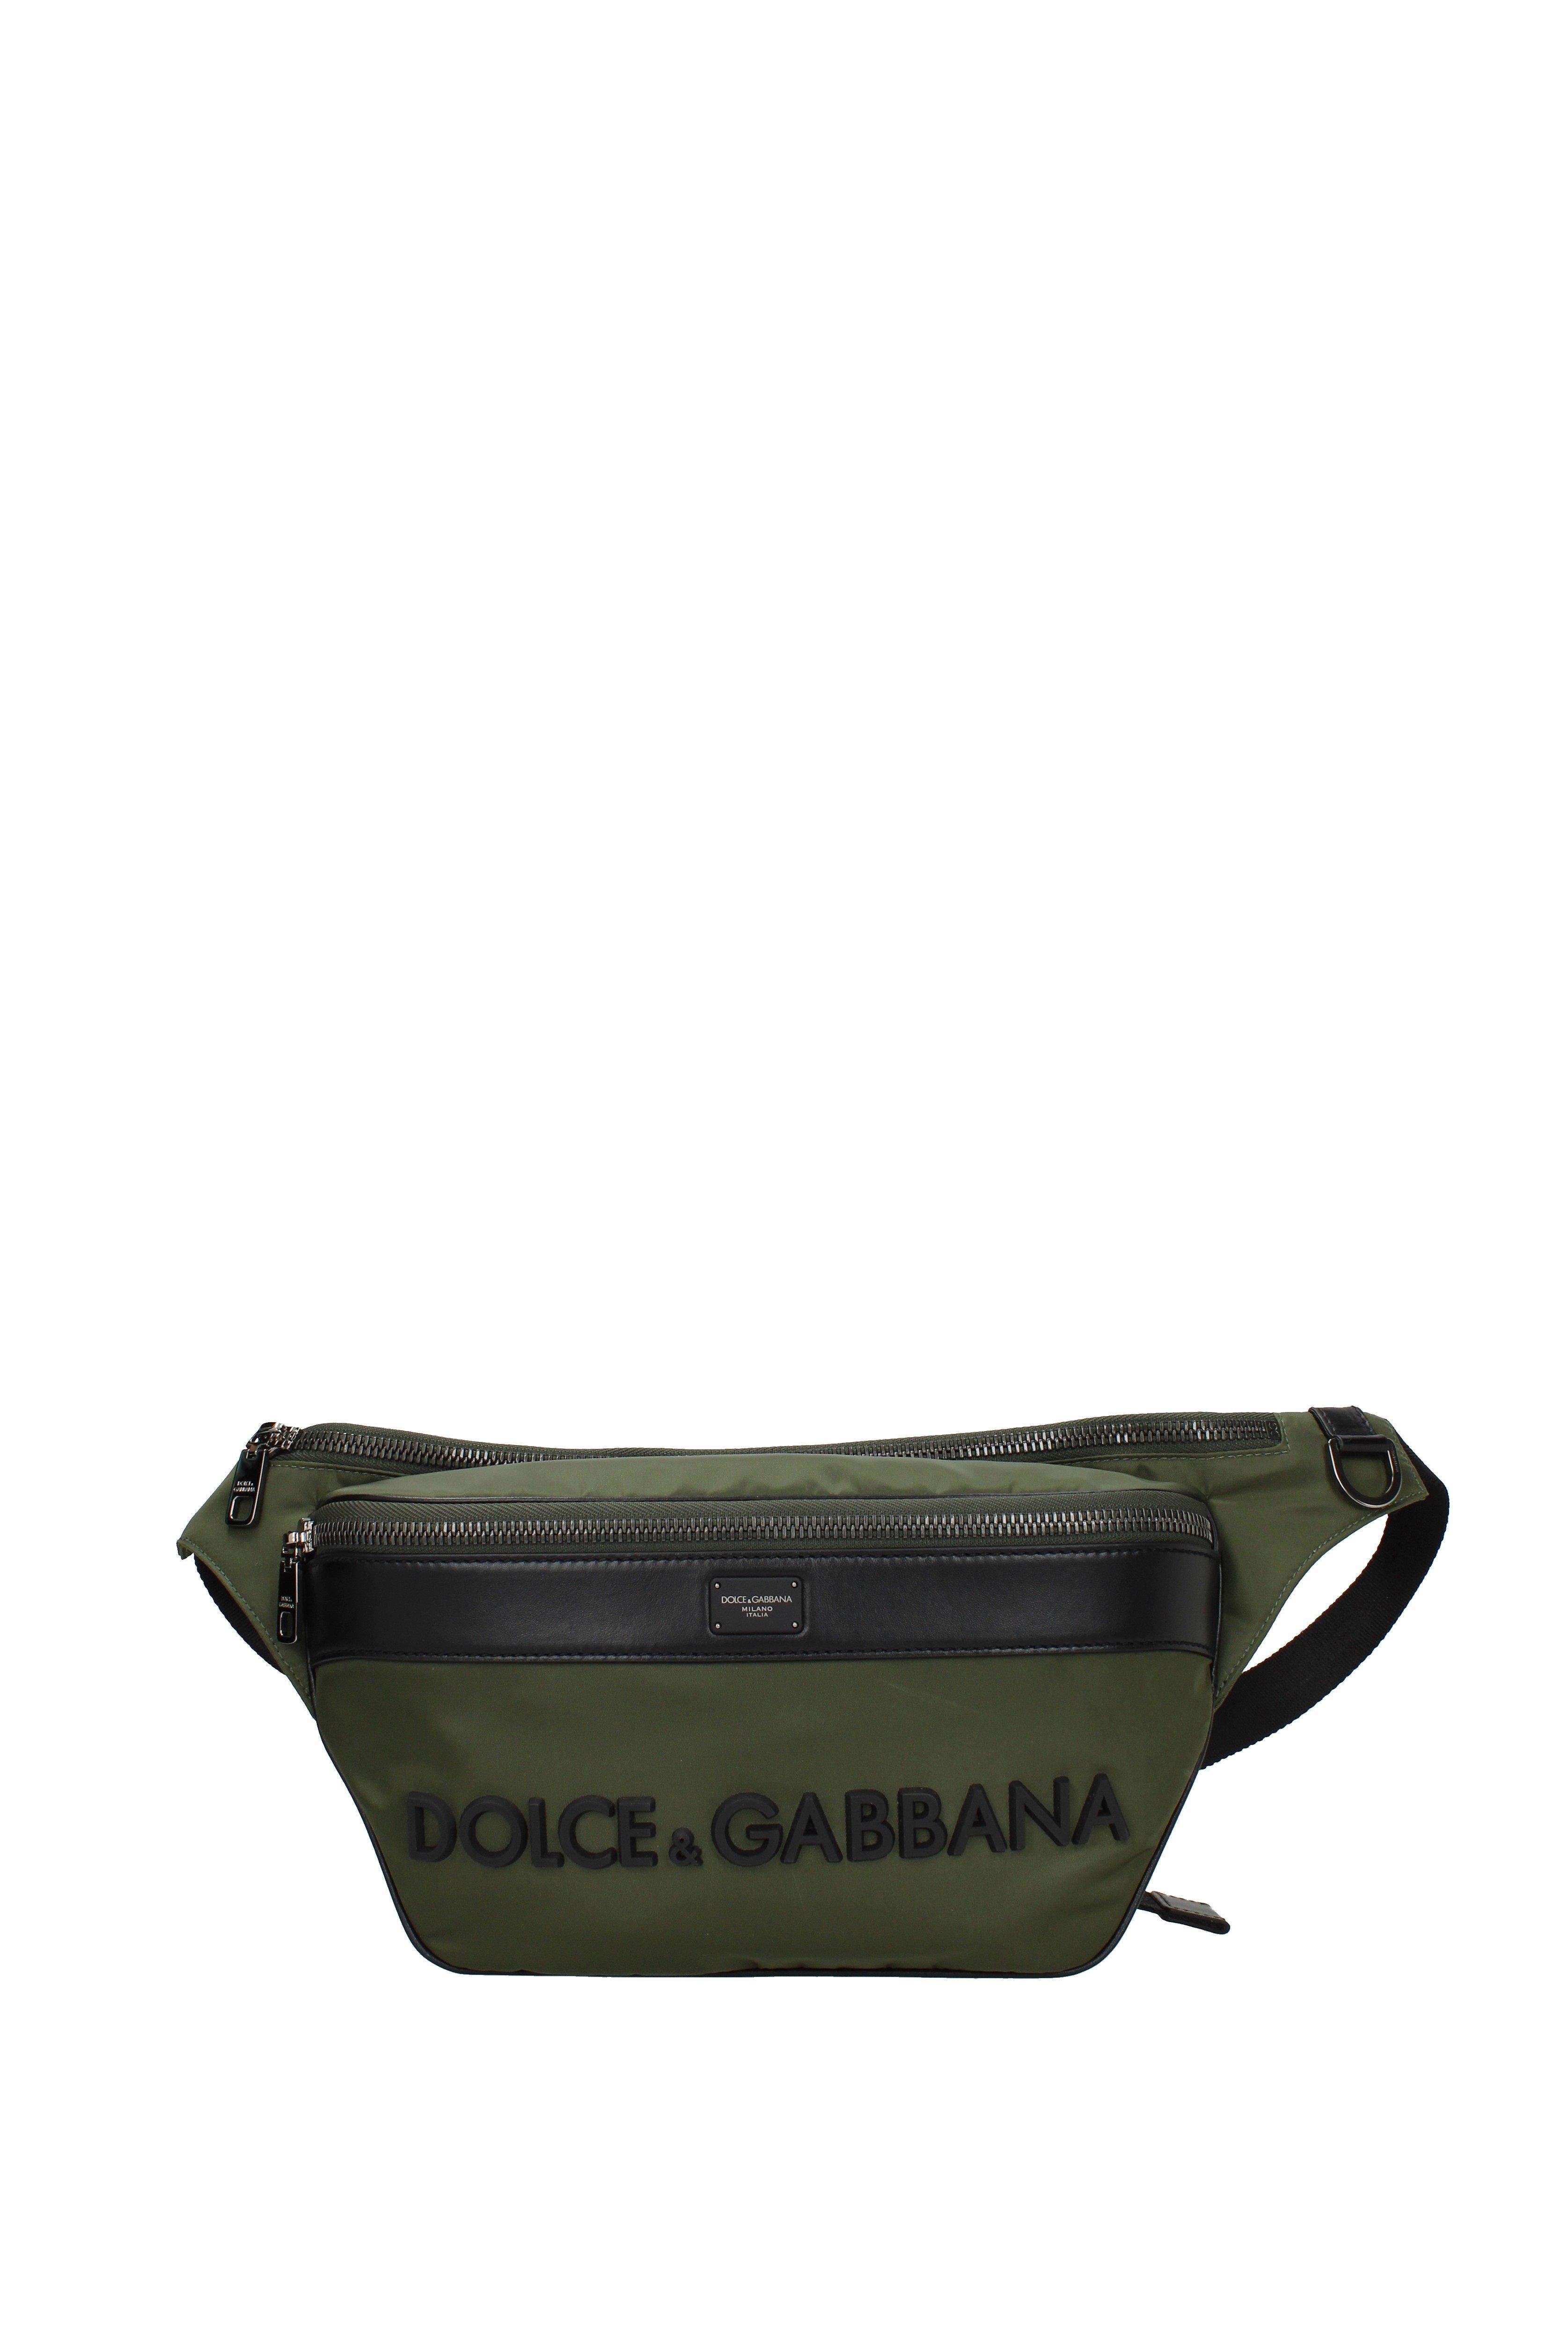 Dolce & Gabbana Green Backpack And Bumbags for Men - Save 2% - Lyst